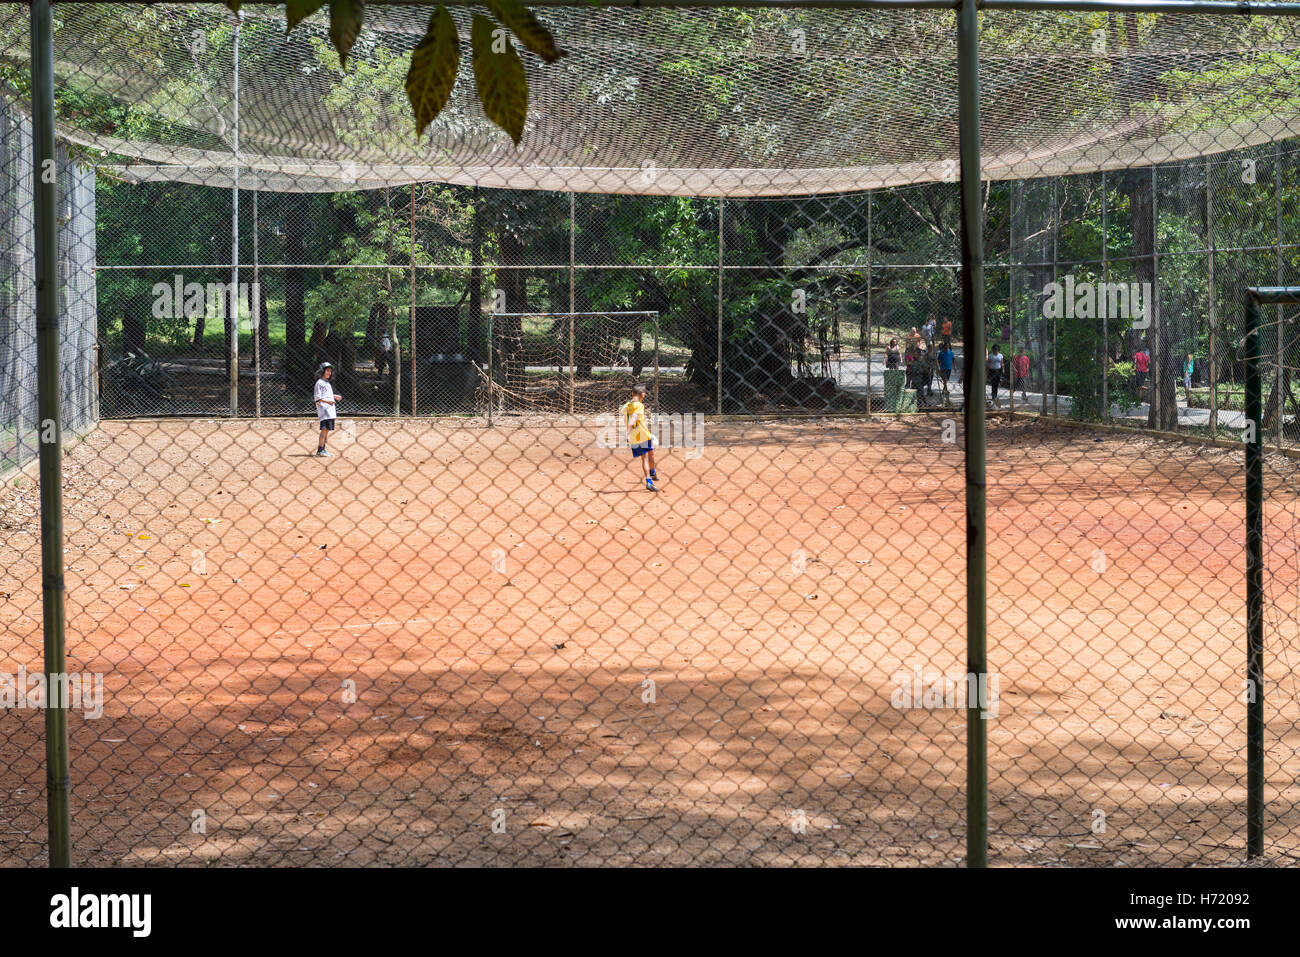 Sao Paulo, Brazil - October 15 2016: Kids playing football at the Aclimacao Park in Sao Paulo, Brazil. Photo series (2 of 8) Stock Photo